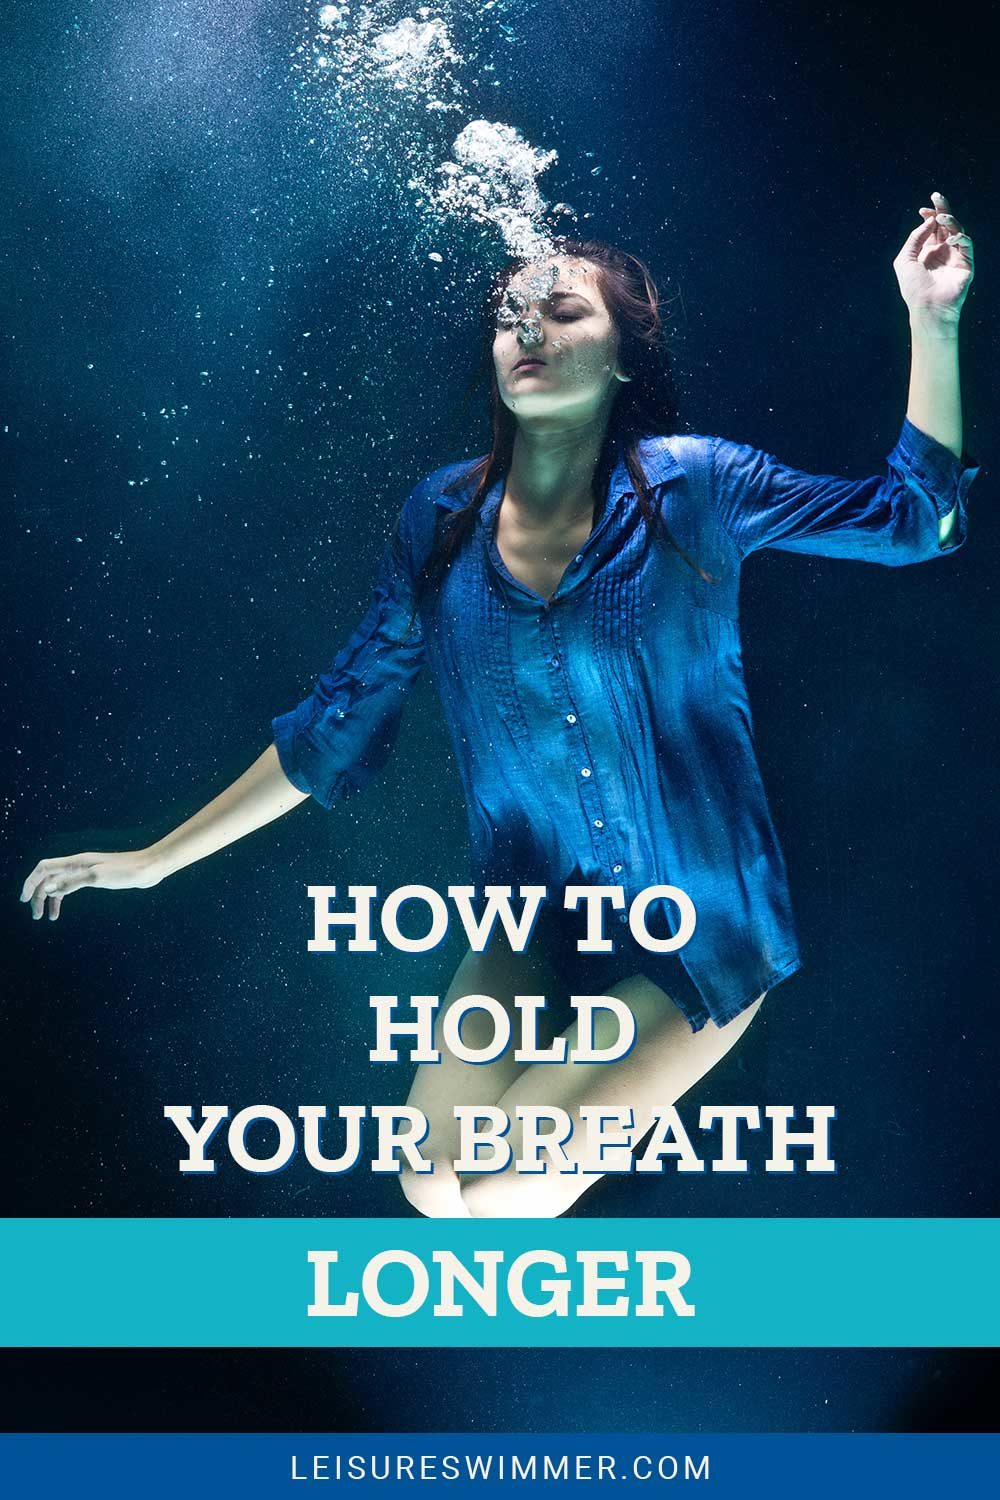 Girl under water while bubble coming out of her mouth - Hold Your Breath Longer.